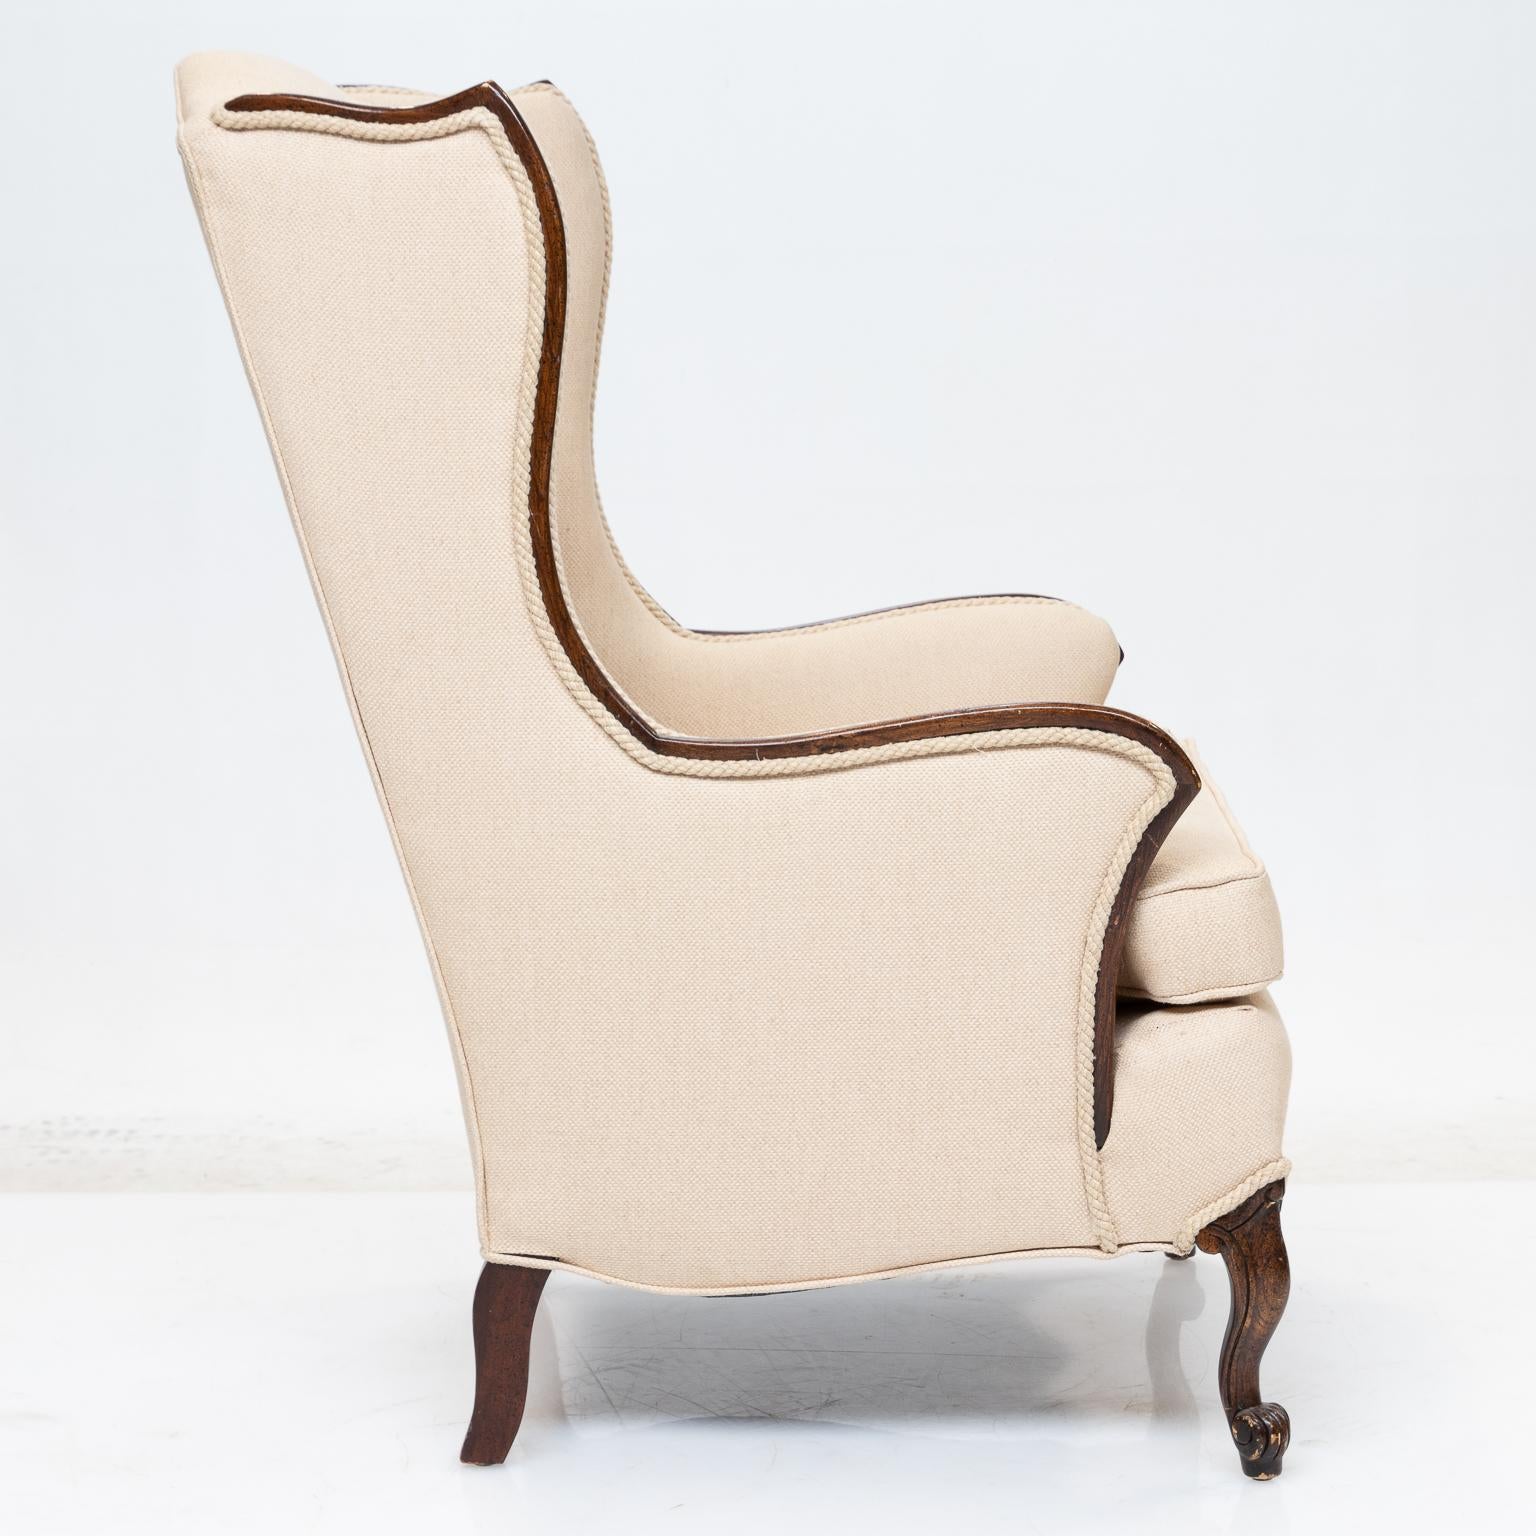 A French style wing chair. Upholstered with a heavy with a cream fabric. Mahogany wood. Fantastic shaping in the design of this chair. Vintage chair from the 1950s has been re-upholstered recently. Very nice quality chair.